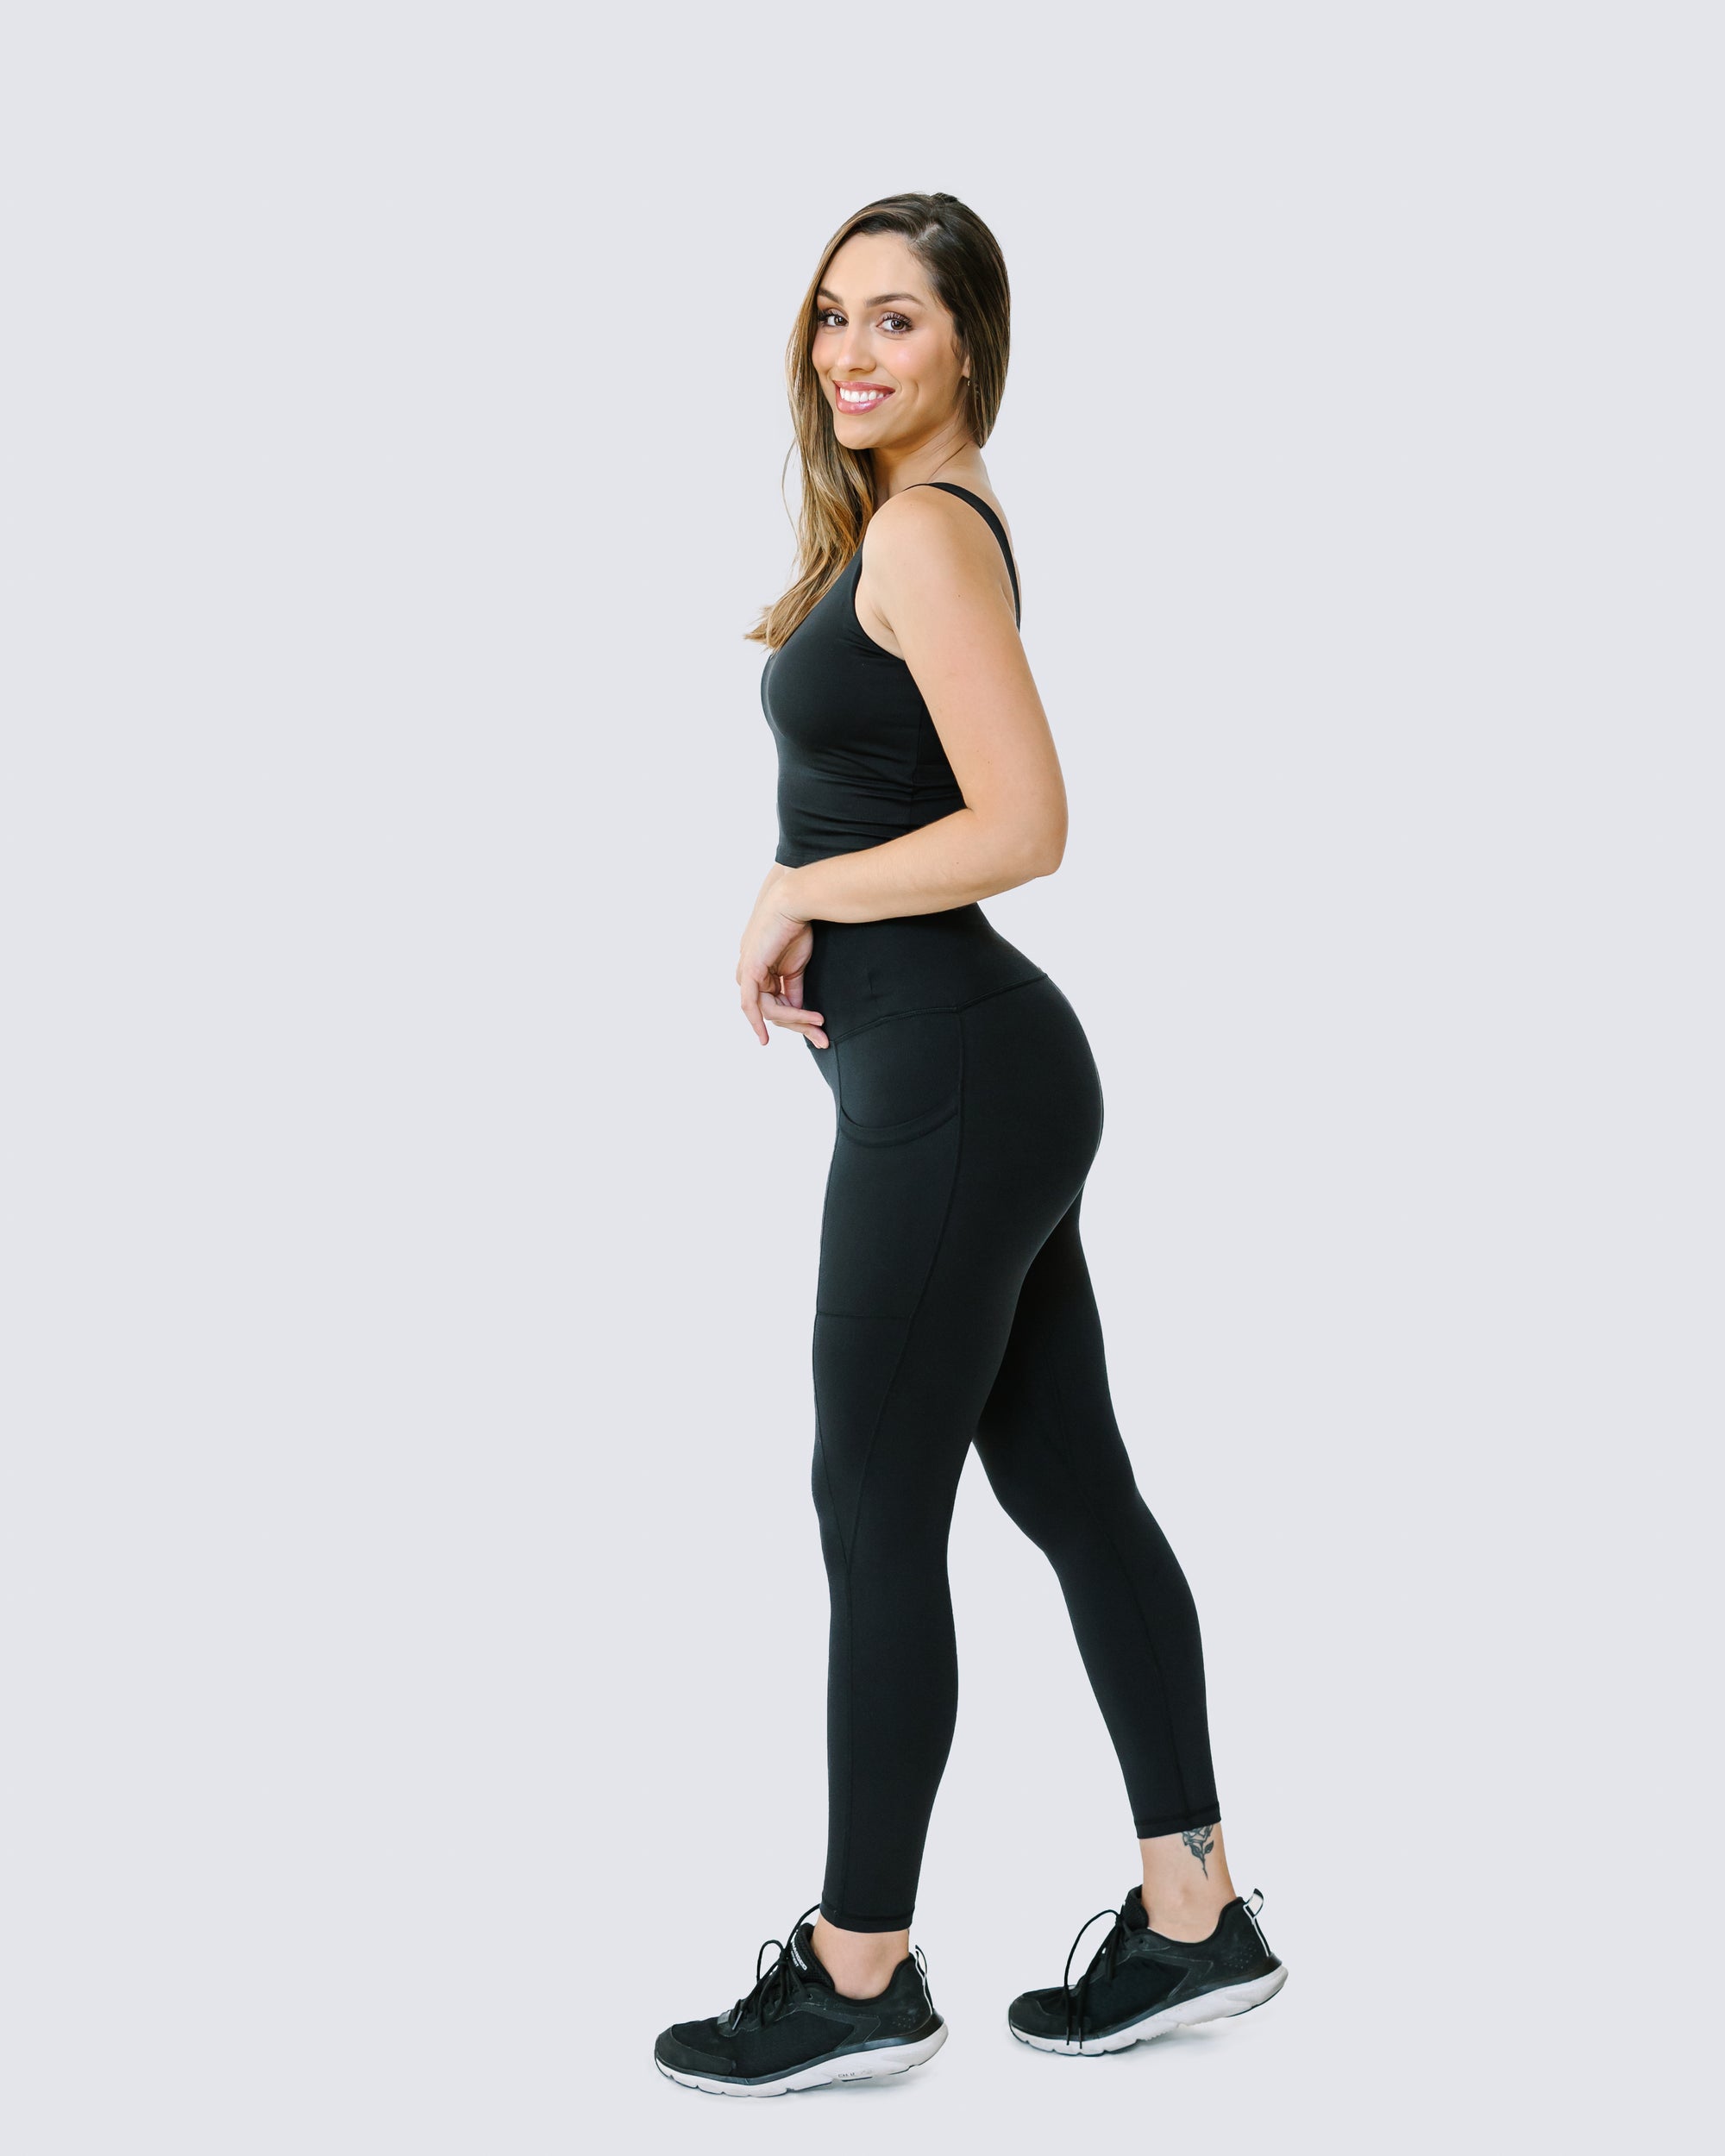 Love and Fit Shop (Loveandfit)